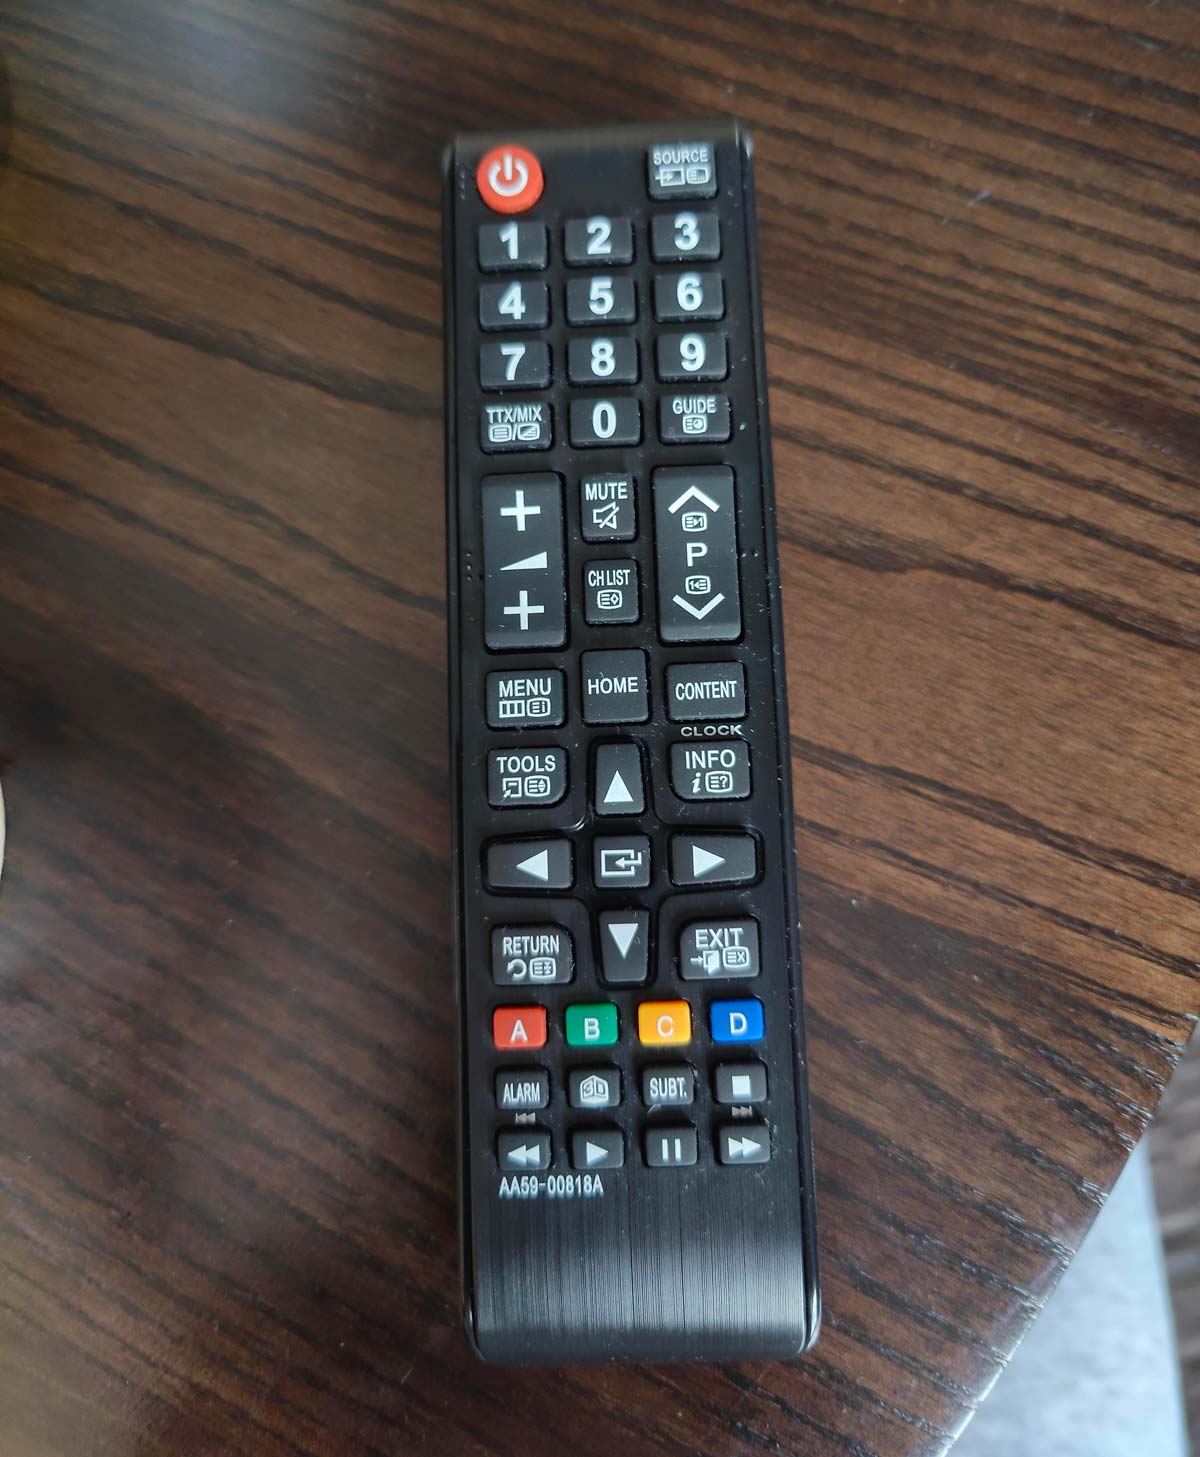 Something is off with this remote and I can't put my finger on it..